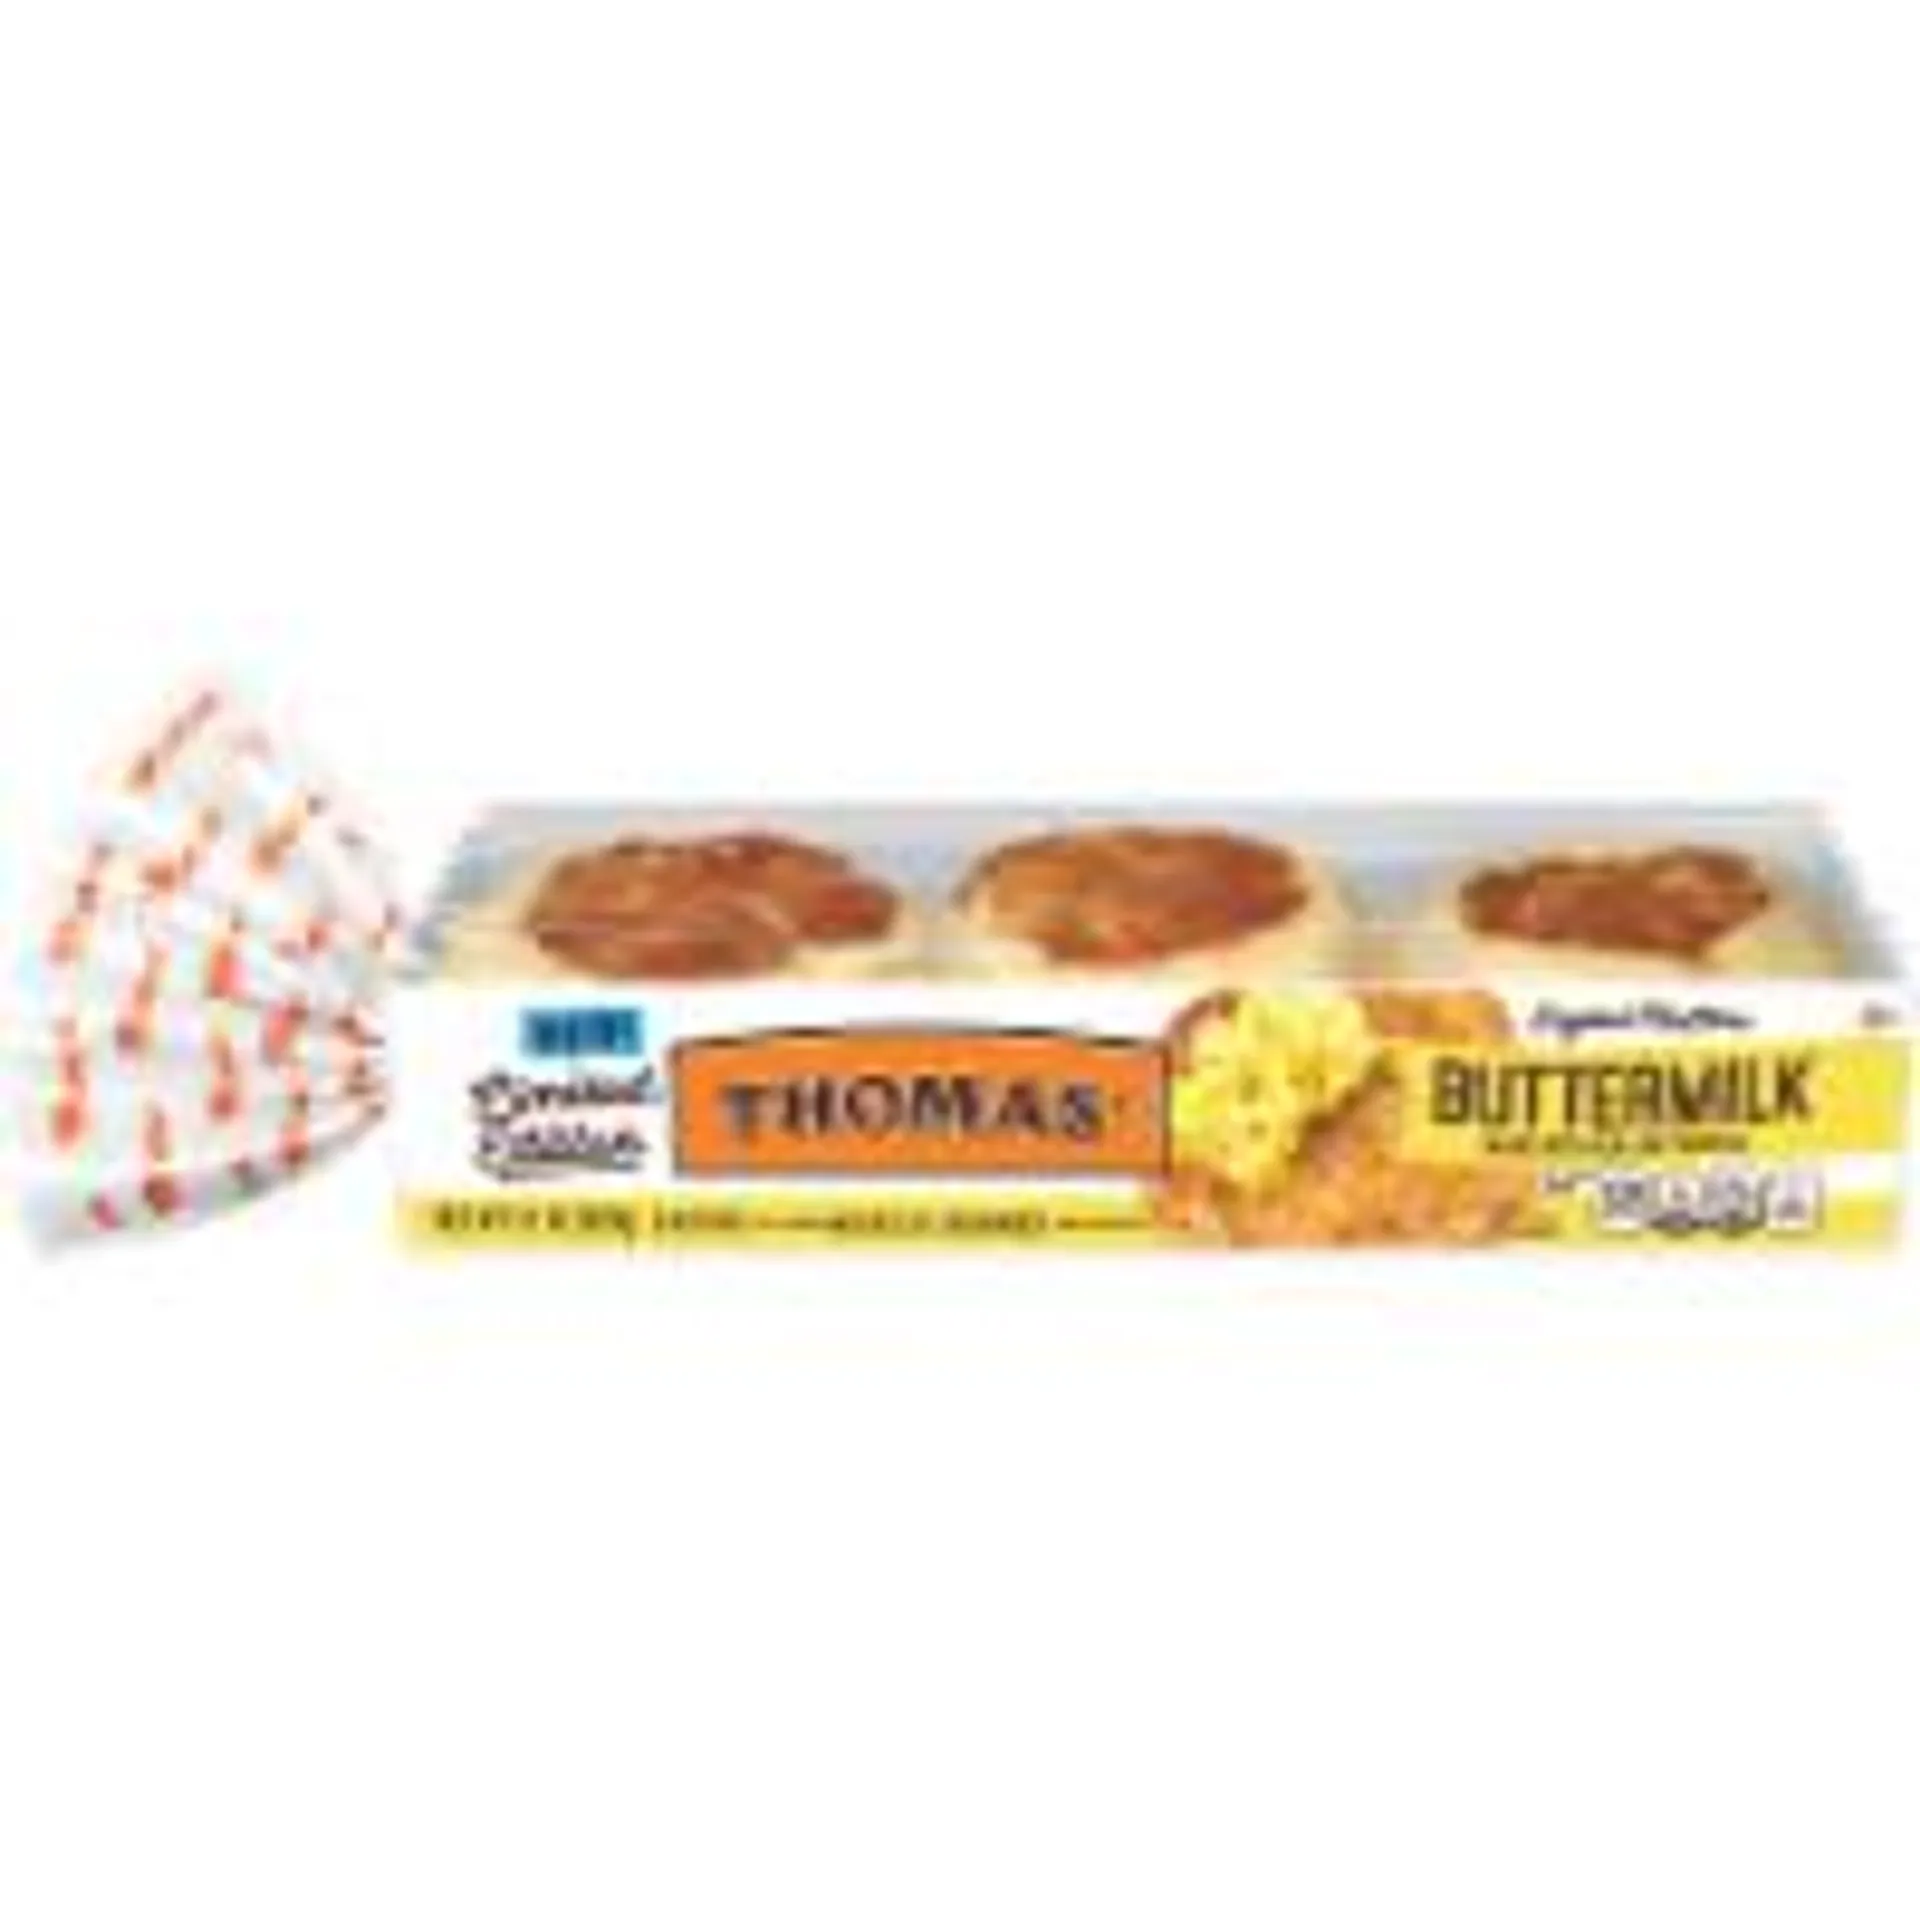 Thomas' Limited Edition Buttermilk English Muffins